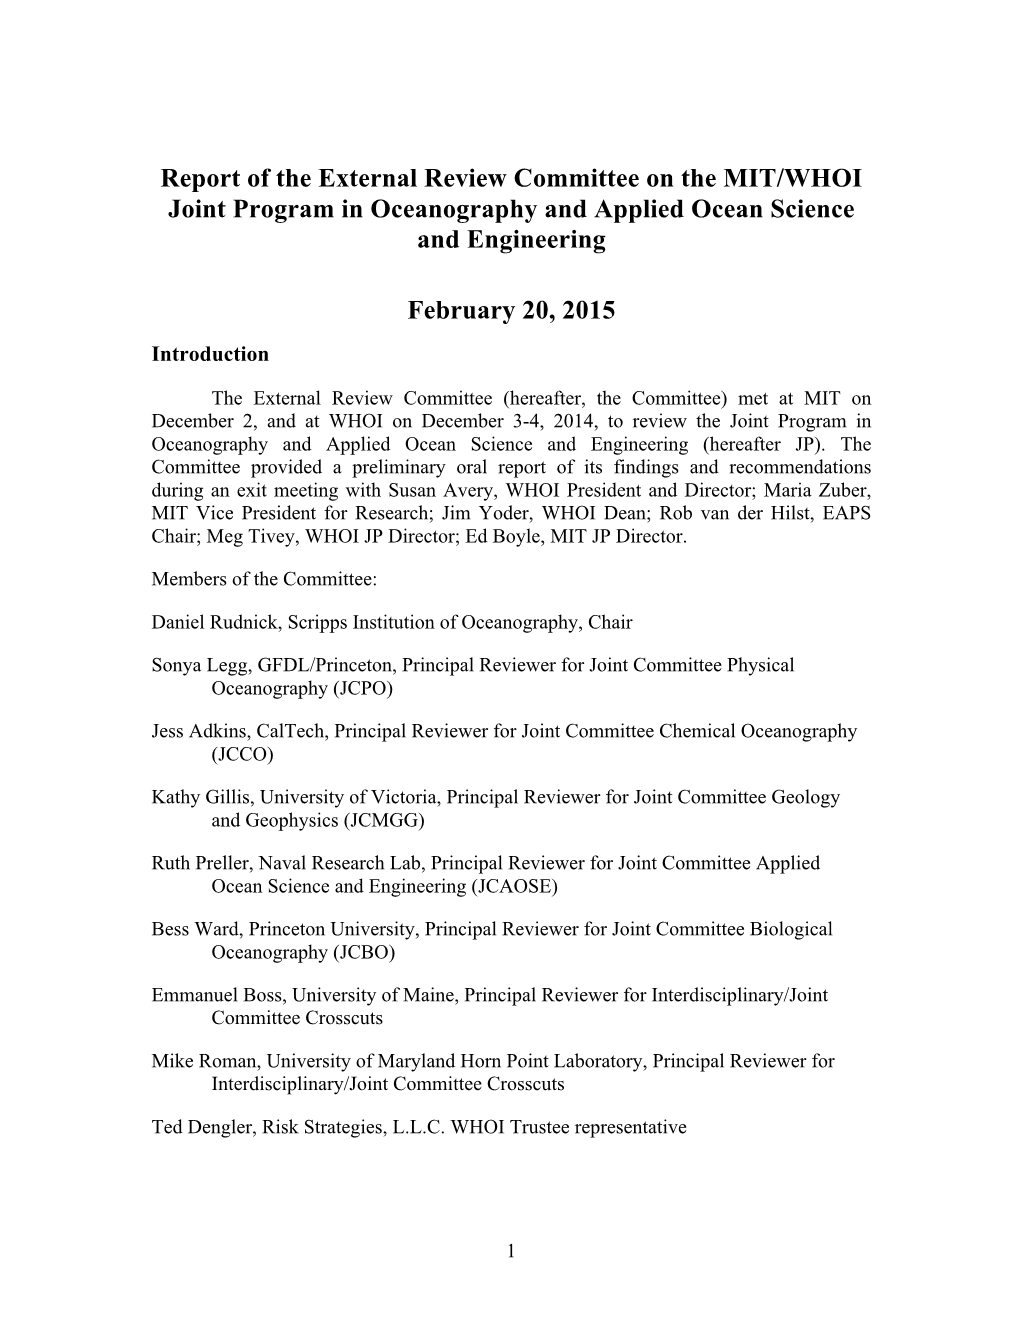 Report of the External Review Committee on the MIT/WHOI Joint Program in Oceanography and Applied Ocean Science and Engineering